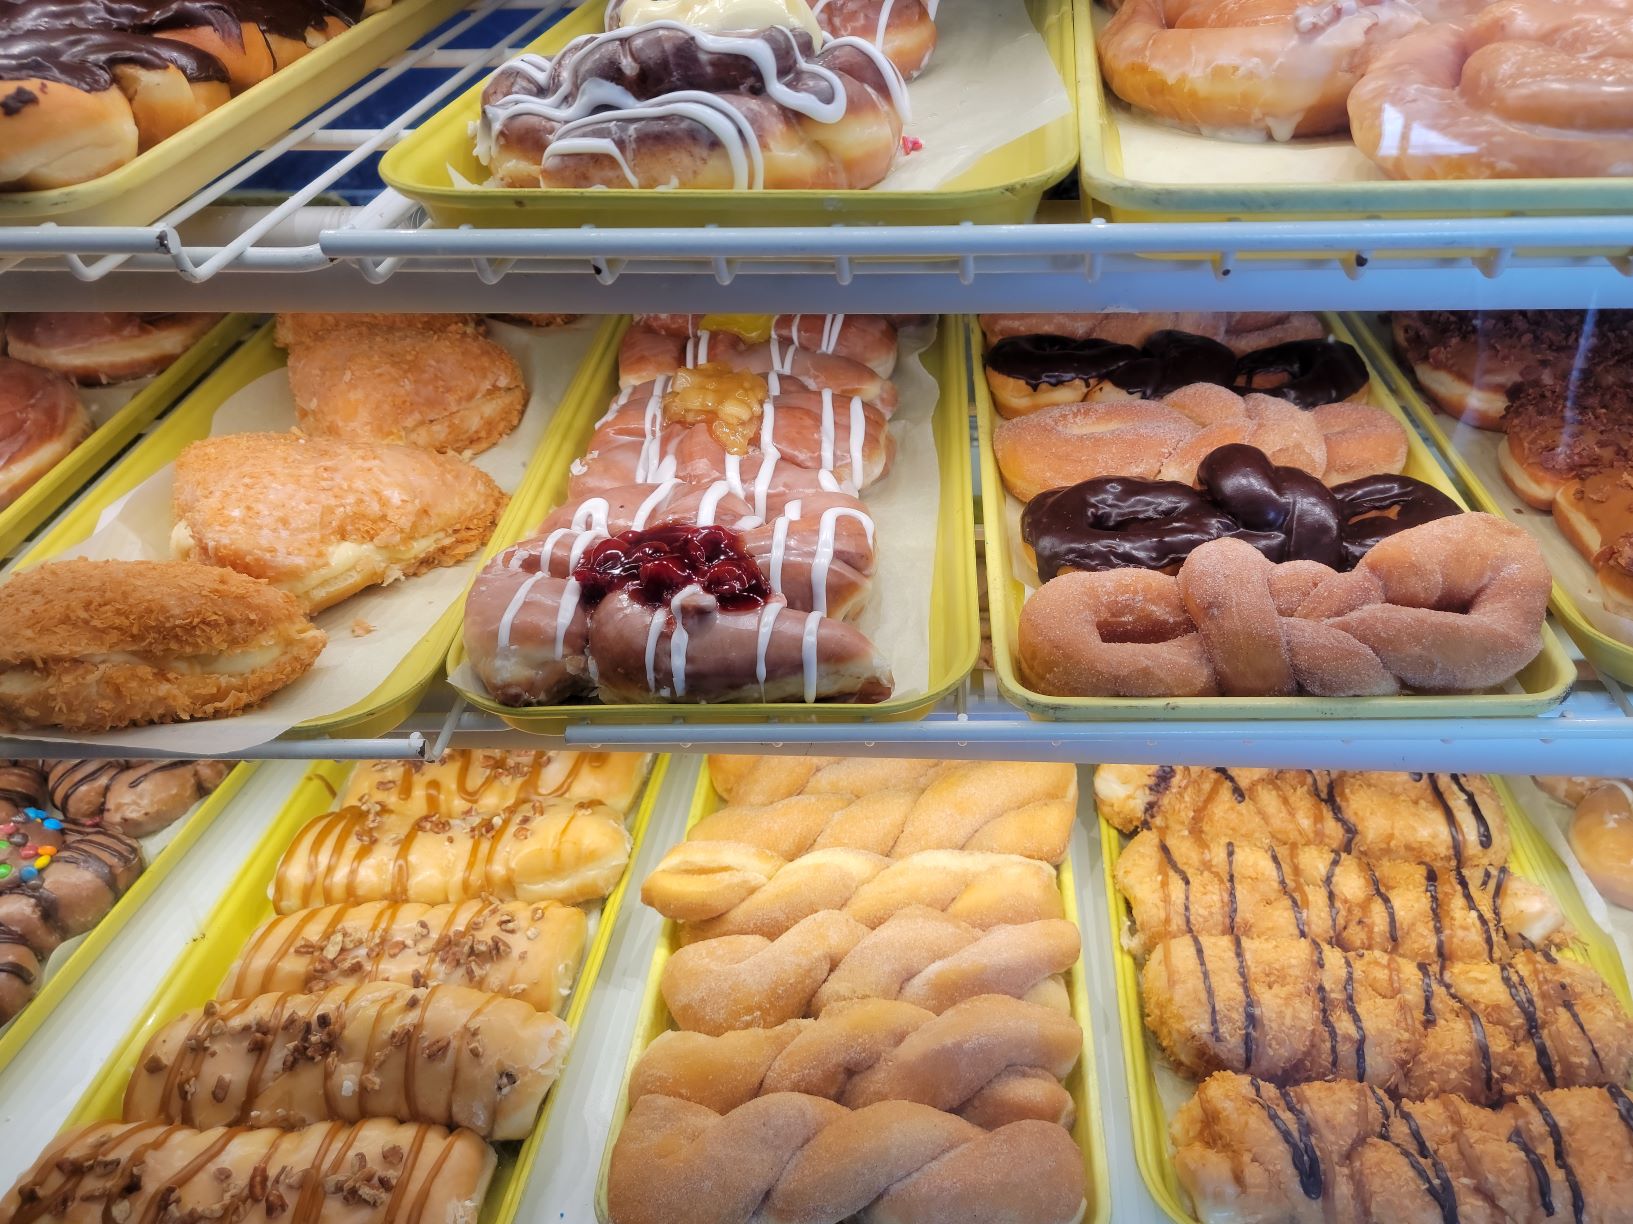 The donut display at a bakery calls out invitations to enjoy more.